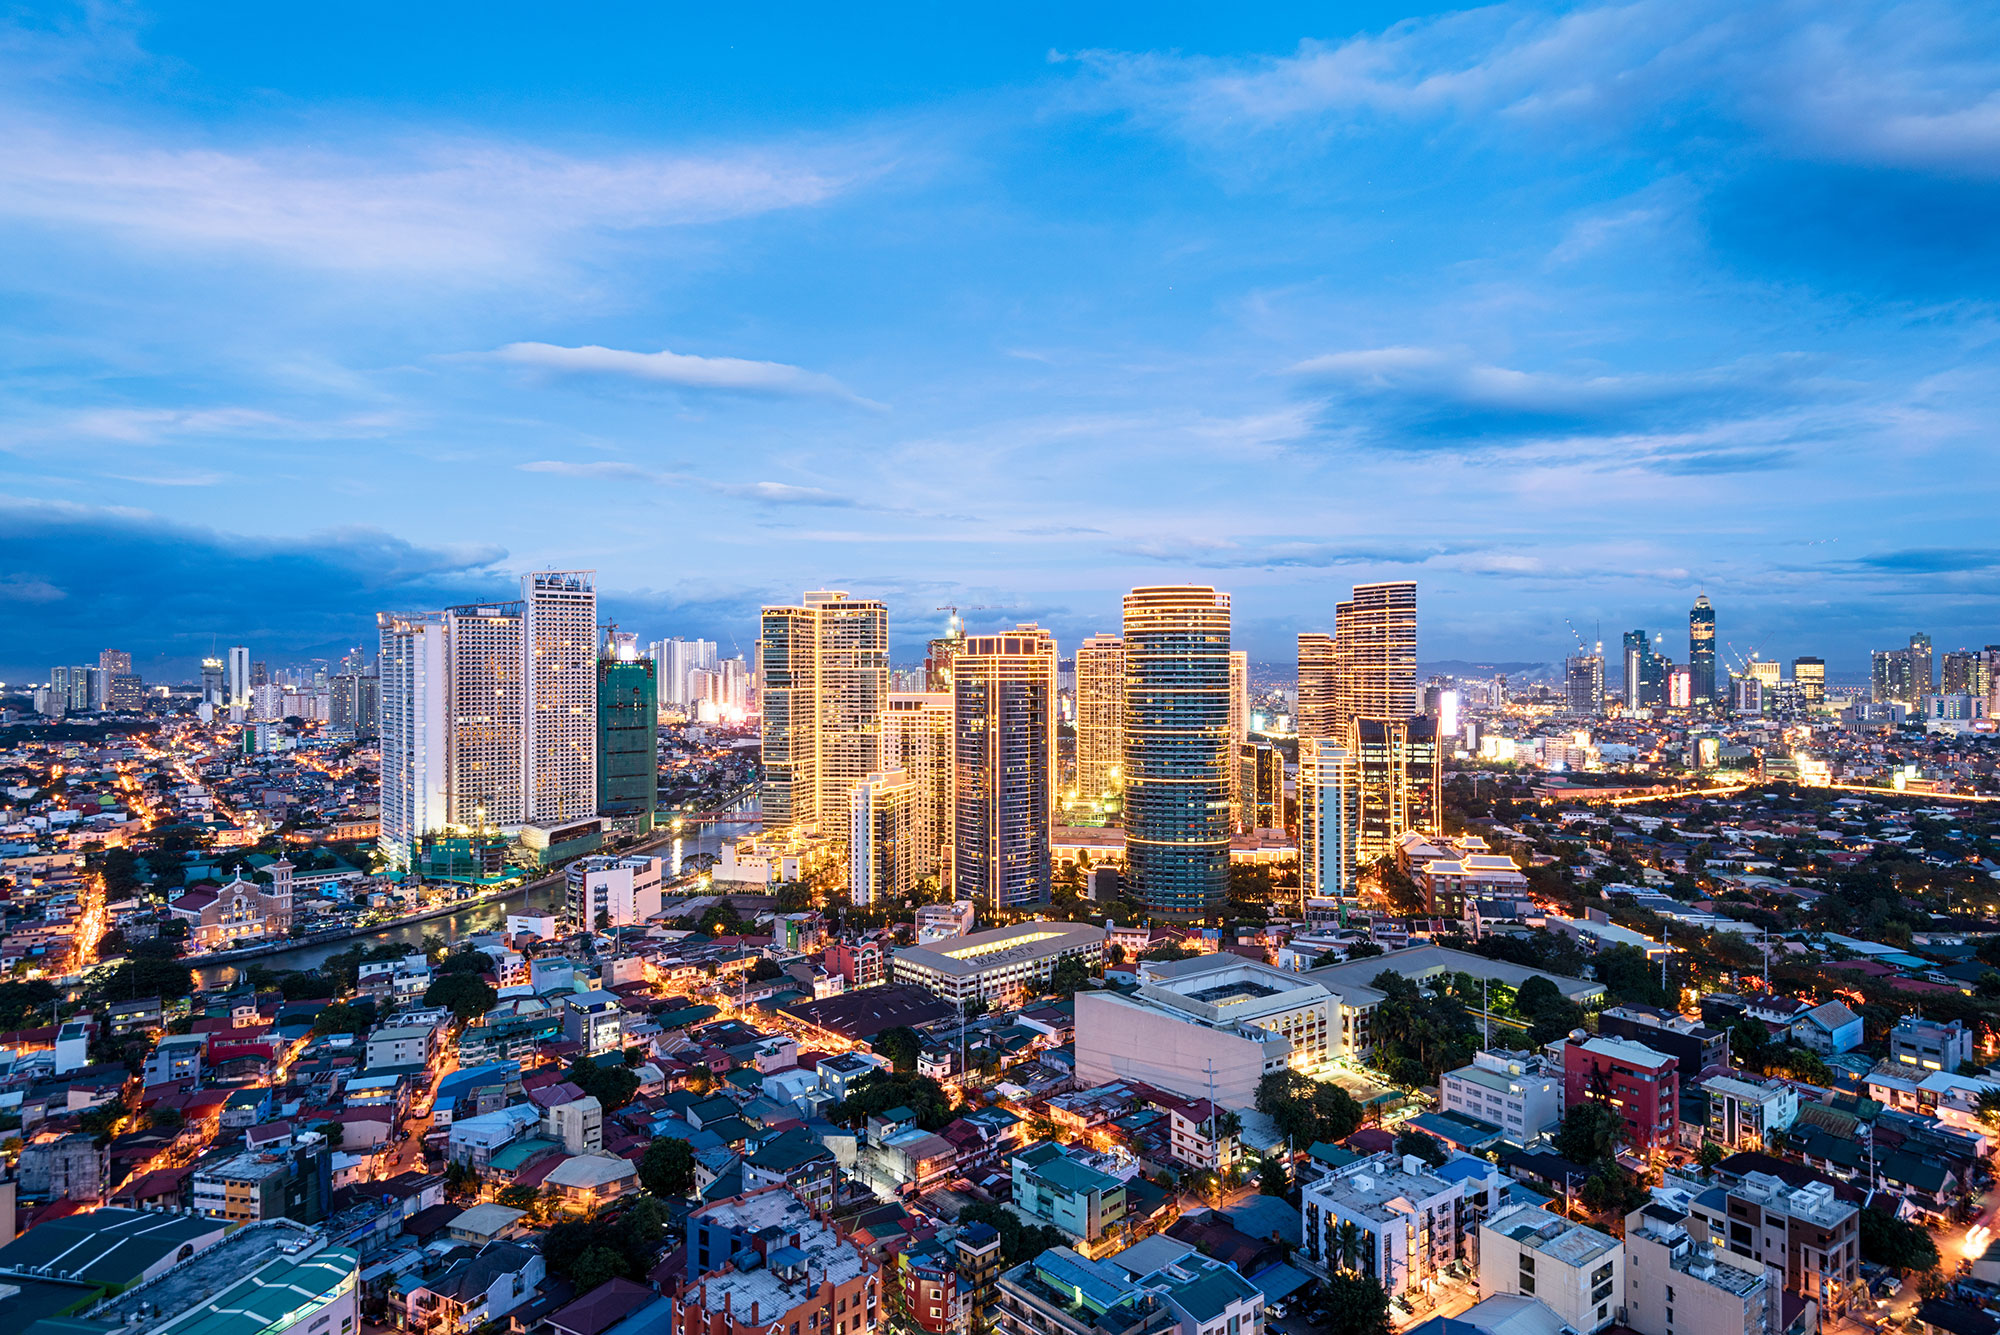 We’re delighted to announce the opening of our new office in Quezon City!